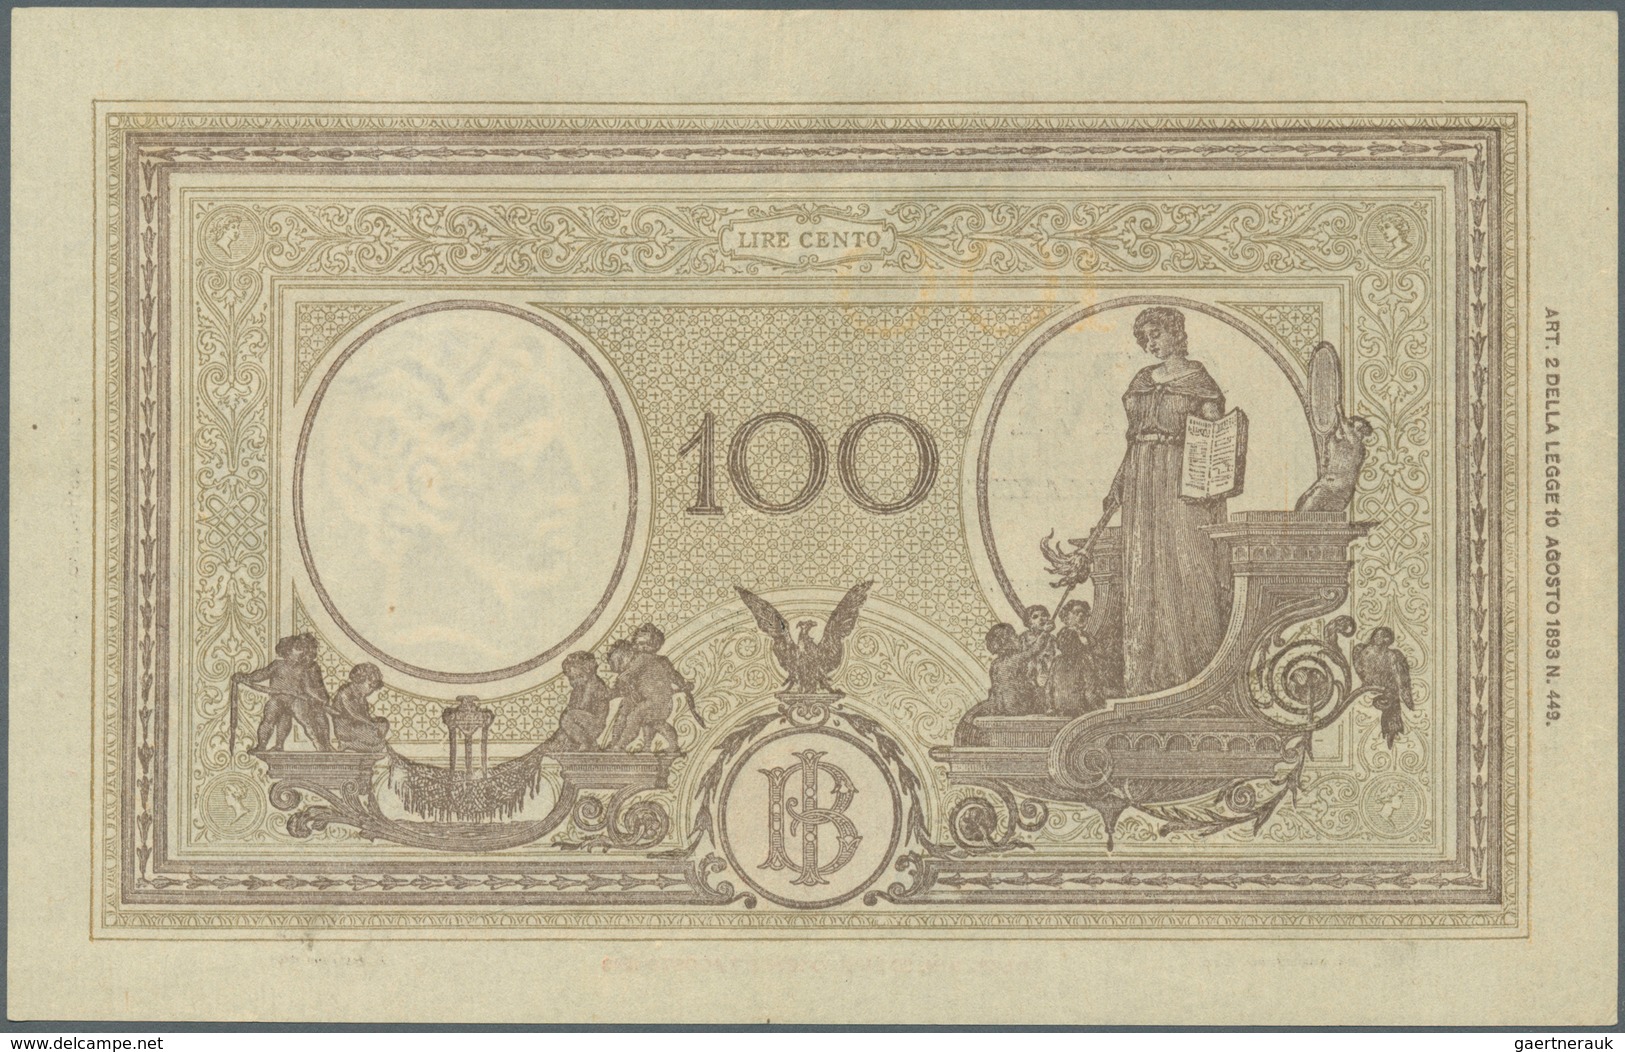 Italy / Italien: set of 5 notes 100 Lire 1943/44 P. 67, all in similar condition, light folds in pap